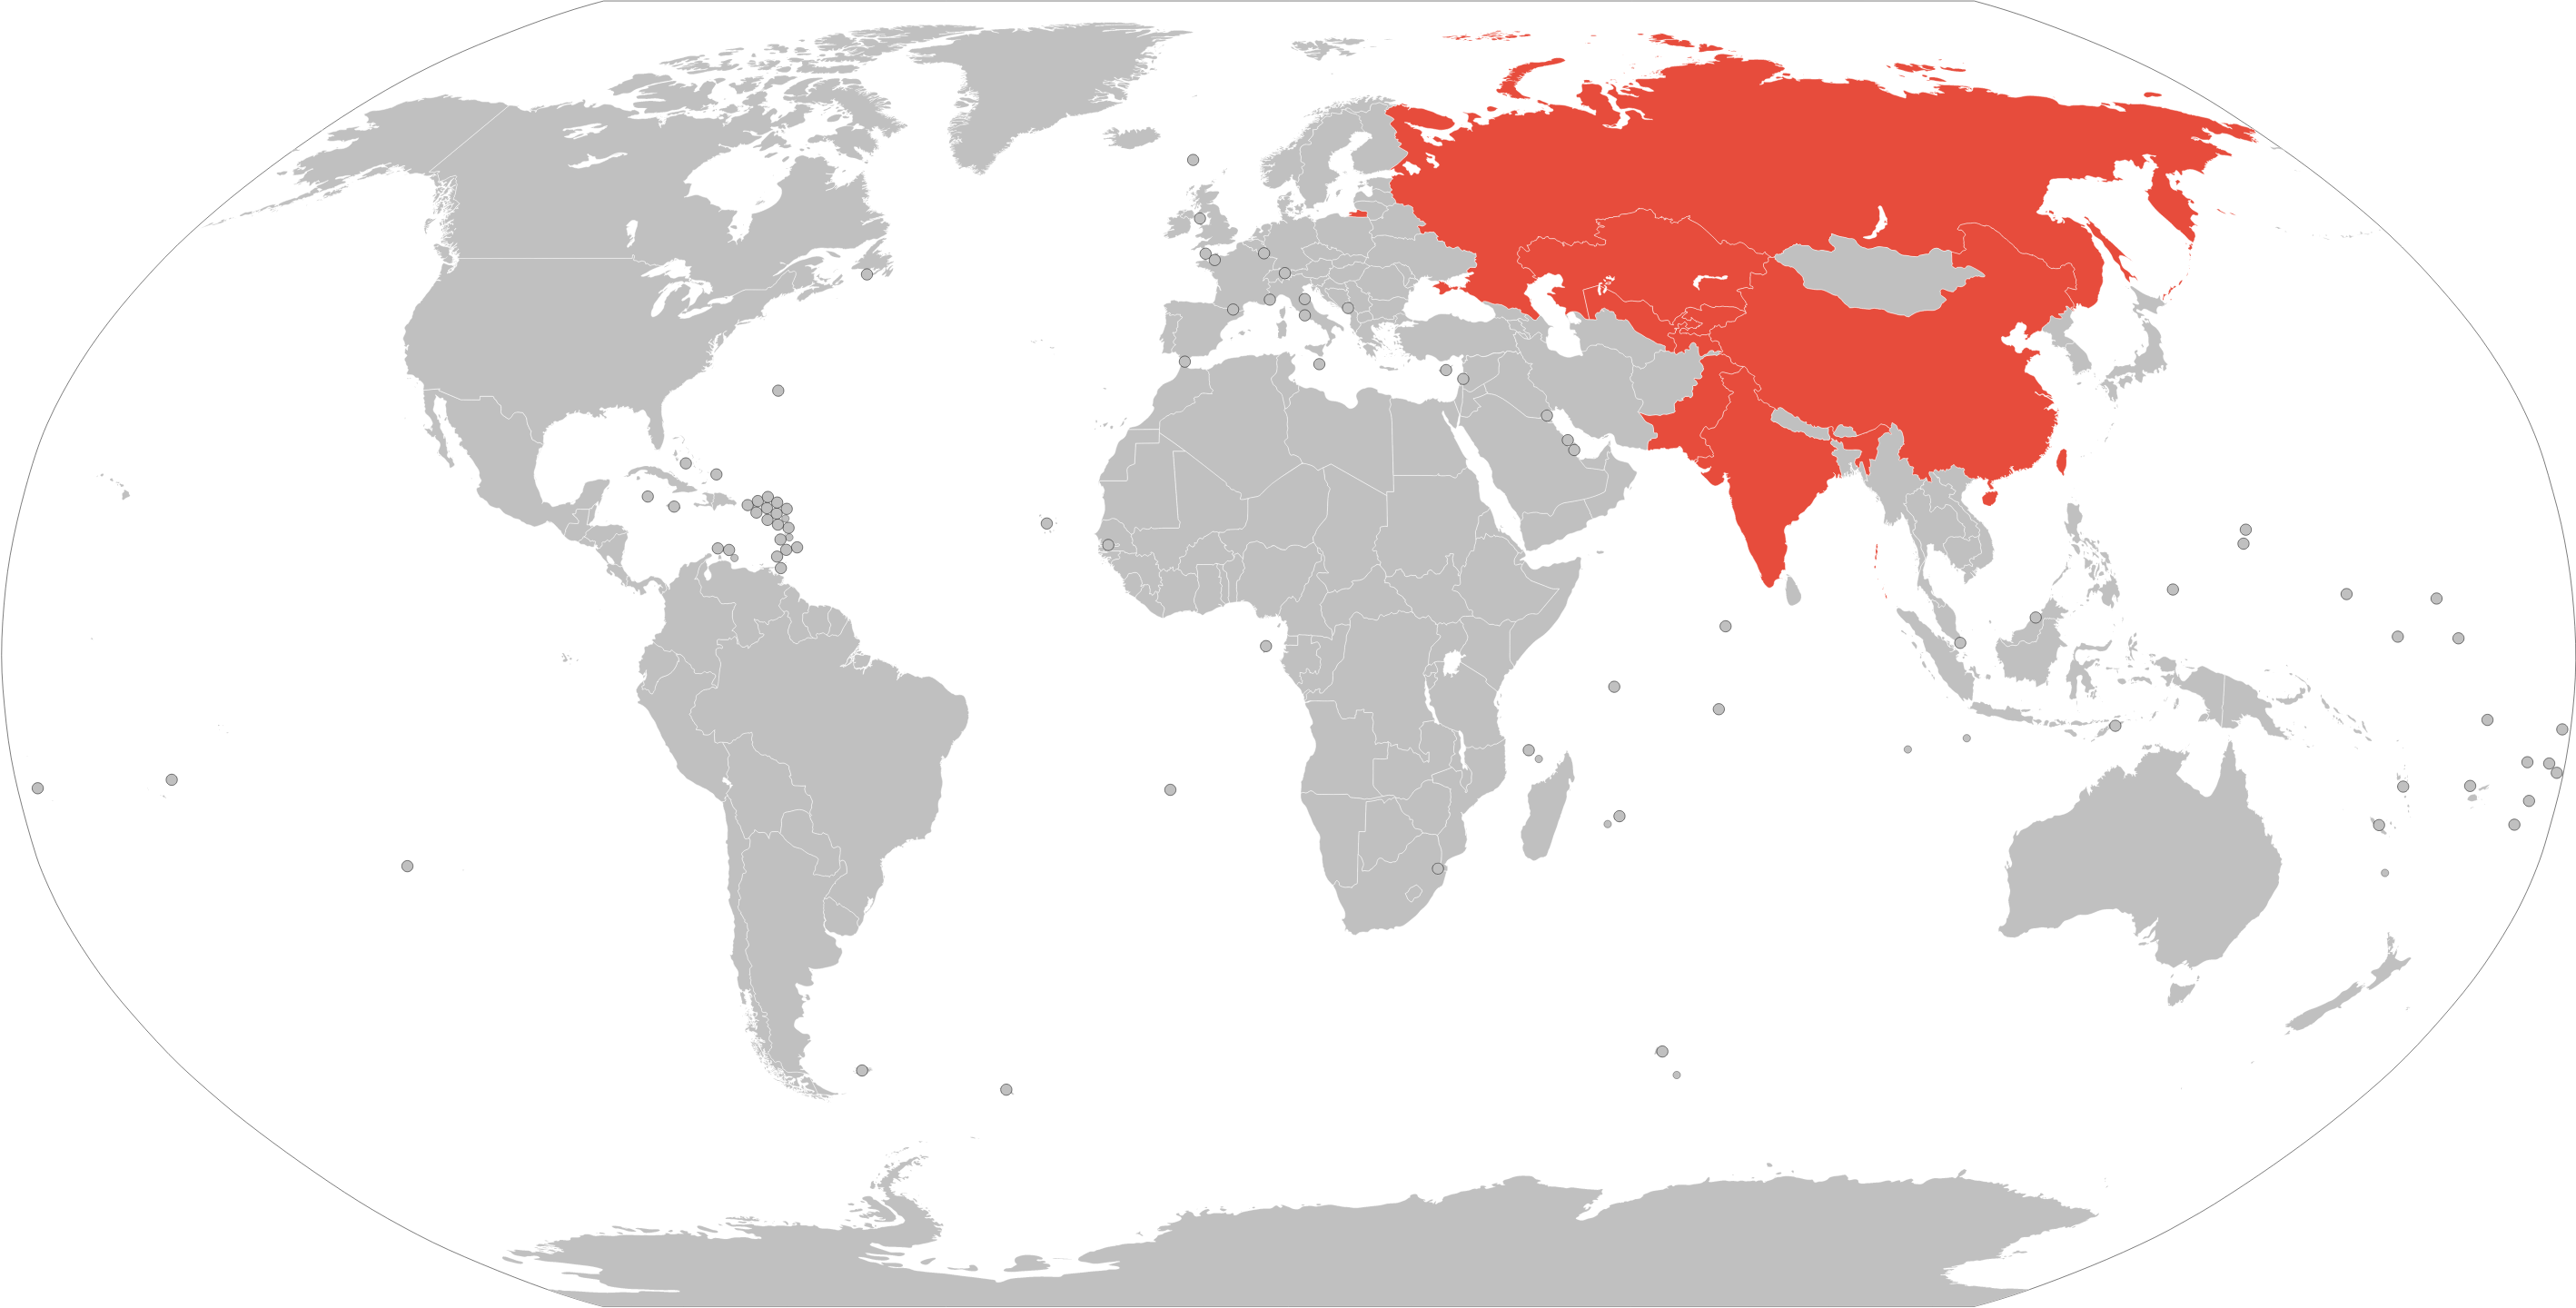 Member states of the SCO coloured in red